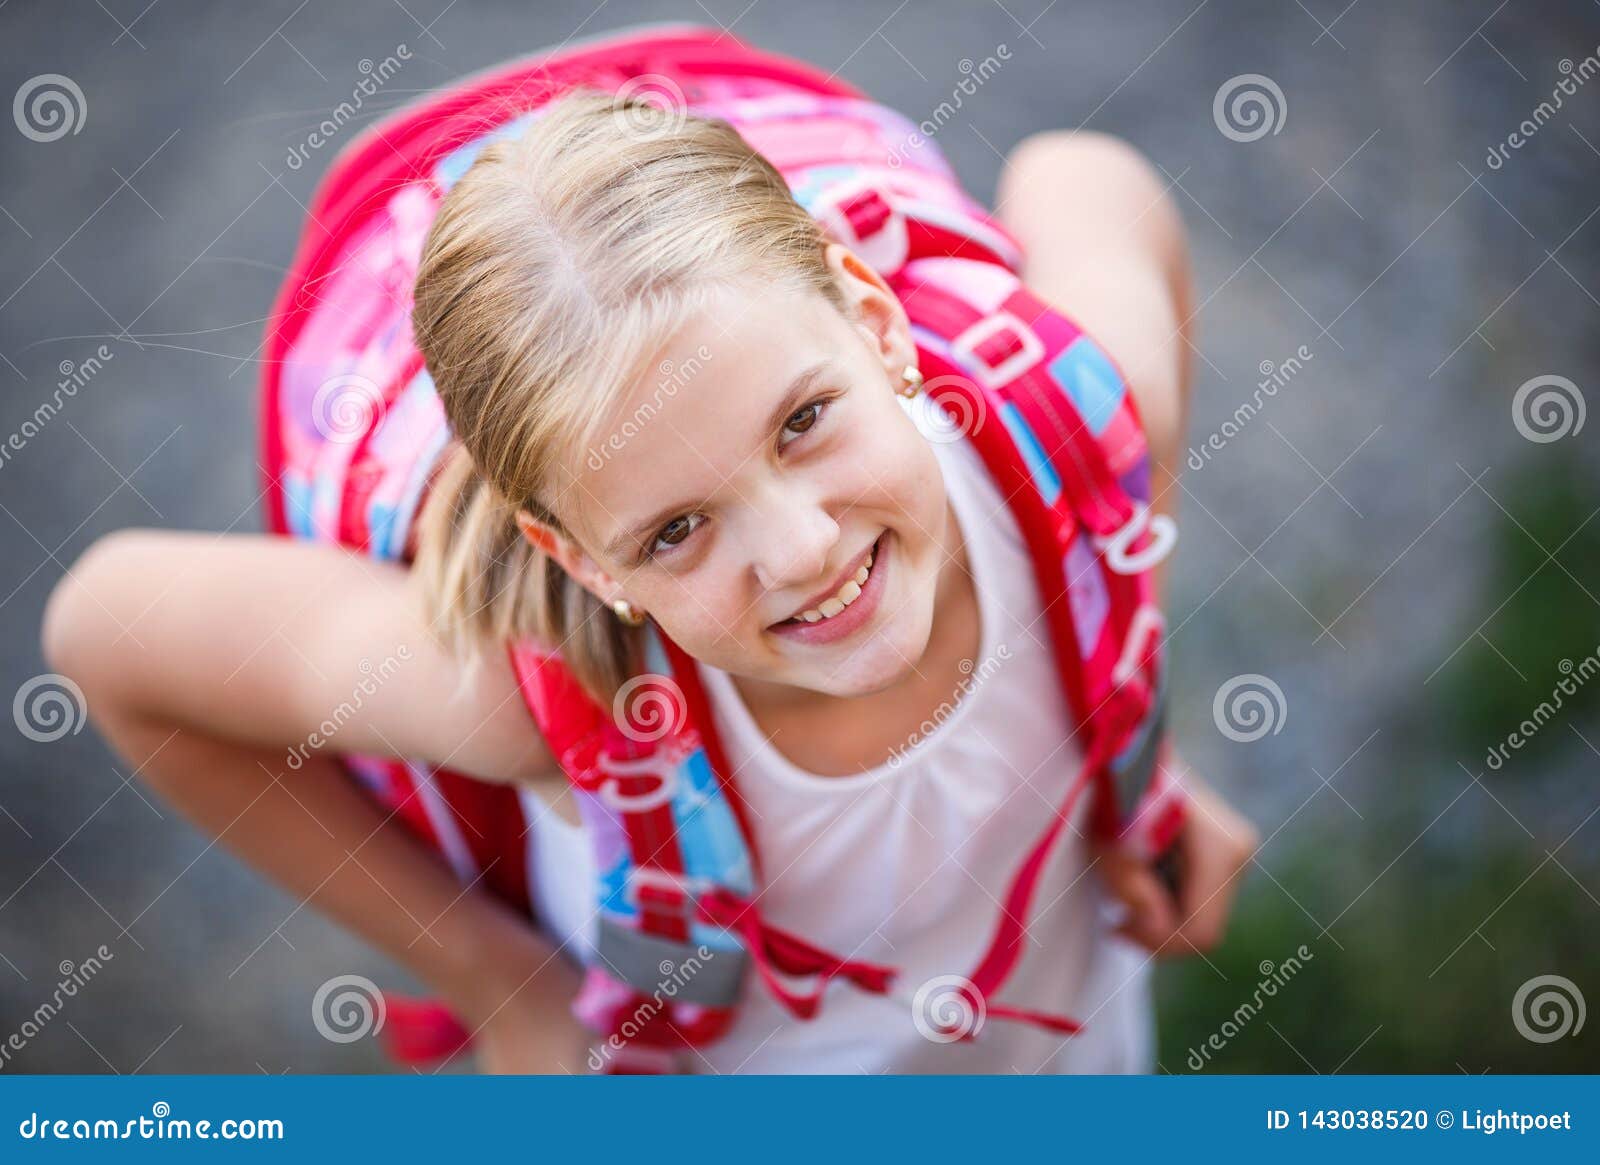 cute little girl going home from school with her backpack